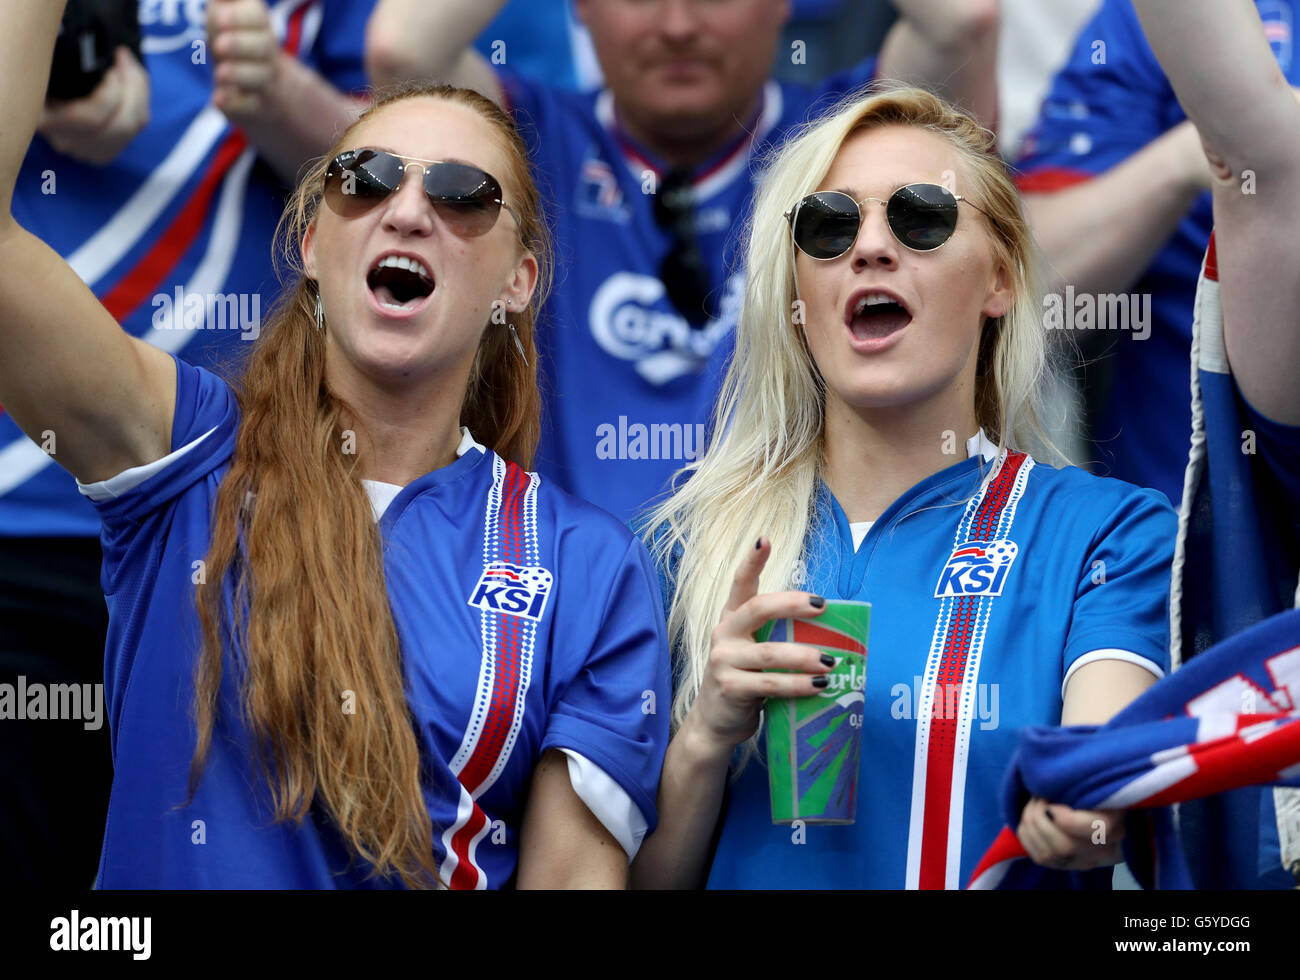 Iceland fans cheer on their side in the stands before the Euro 2016, Group F match at the Stade de France, Paris. Stock Photo